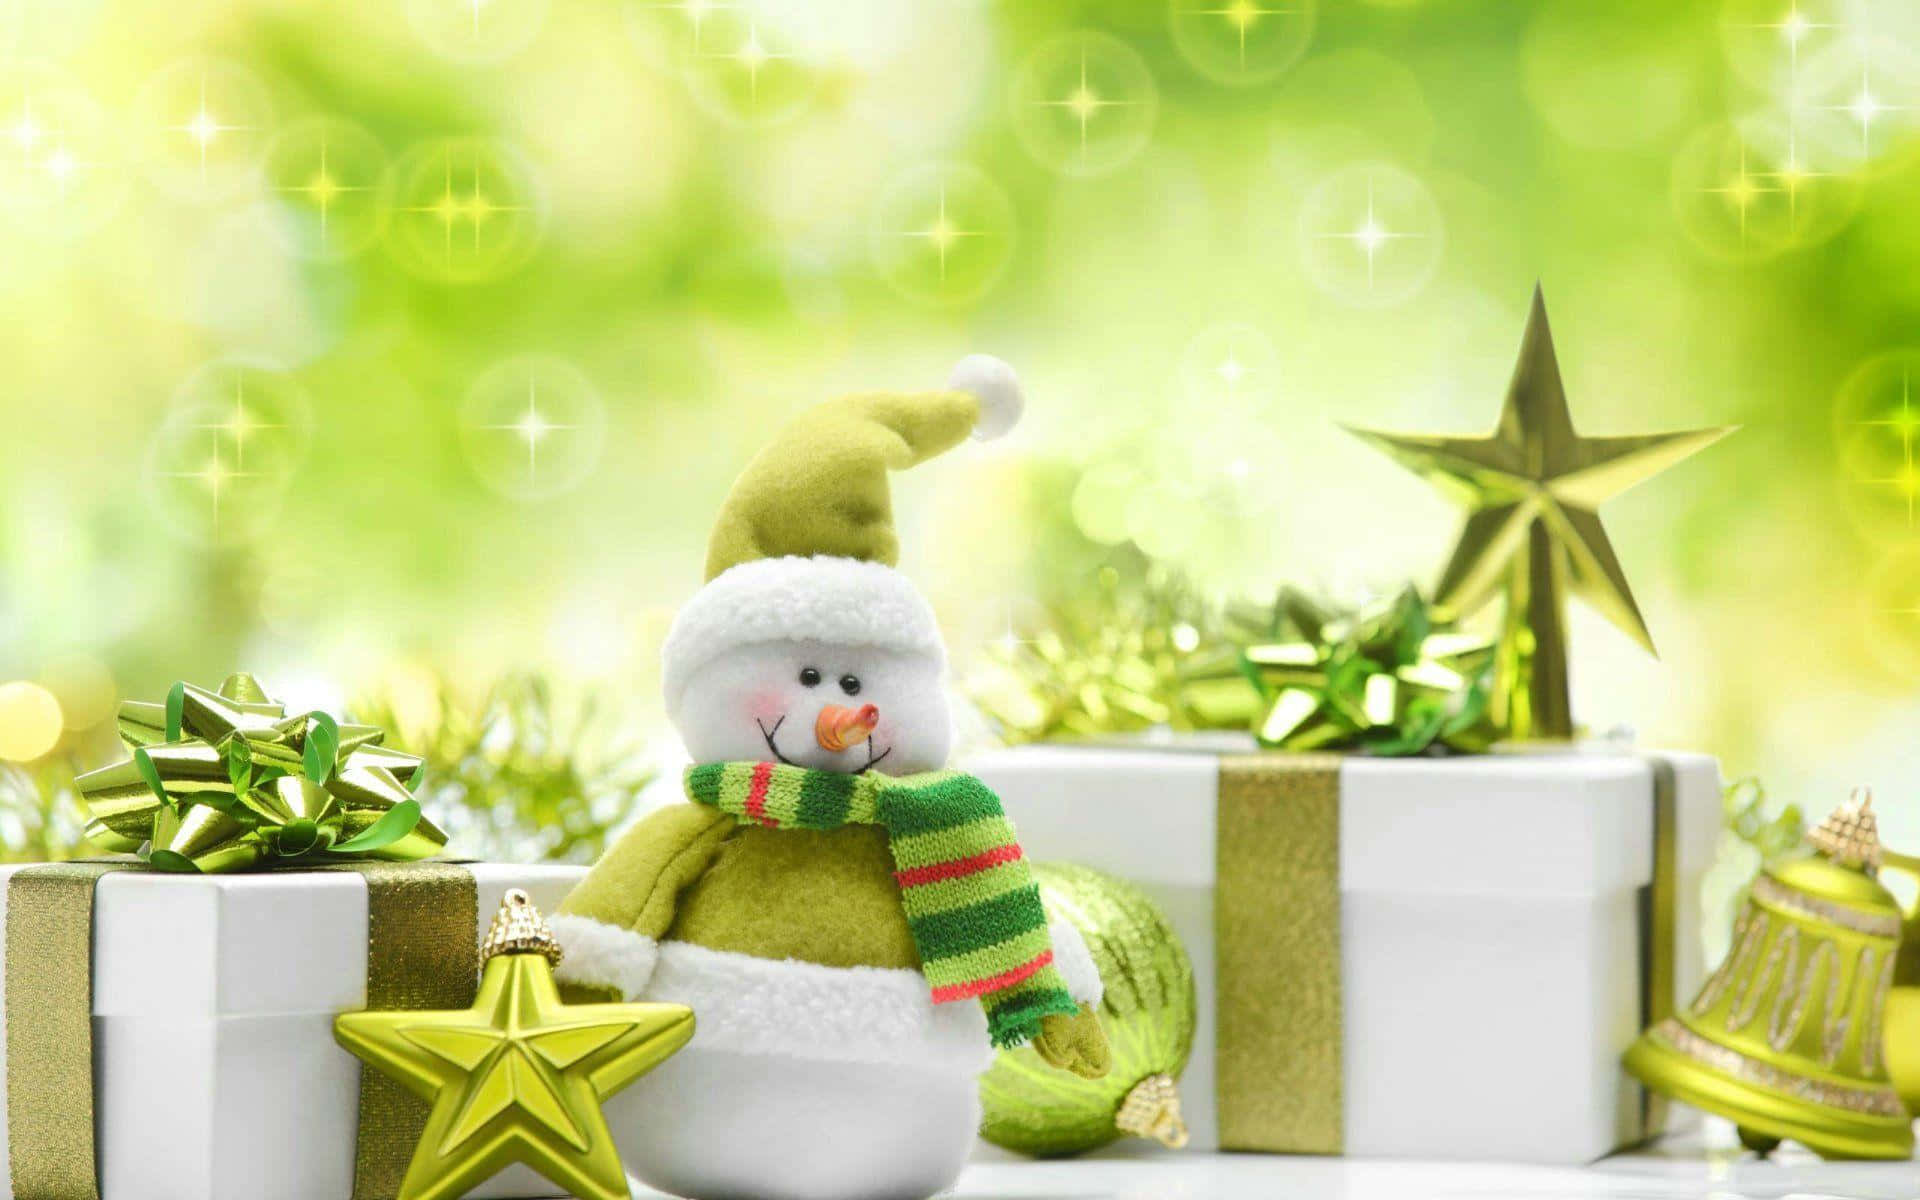 Green Christmas Gifts With Snowman Picture